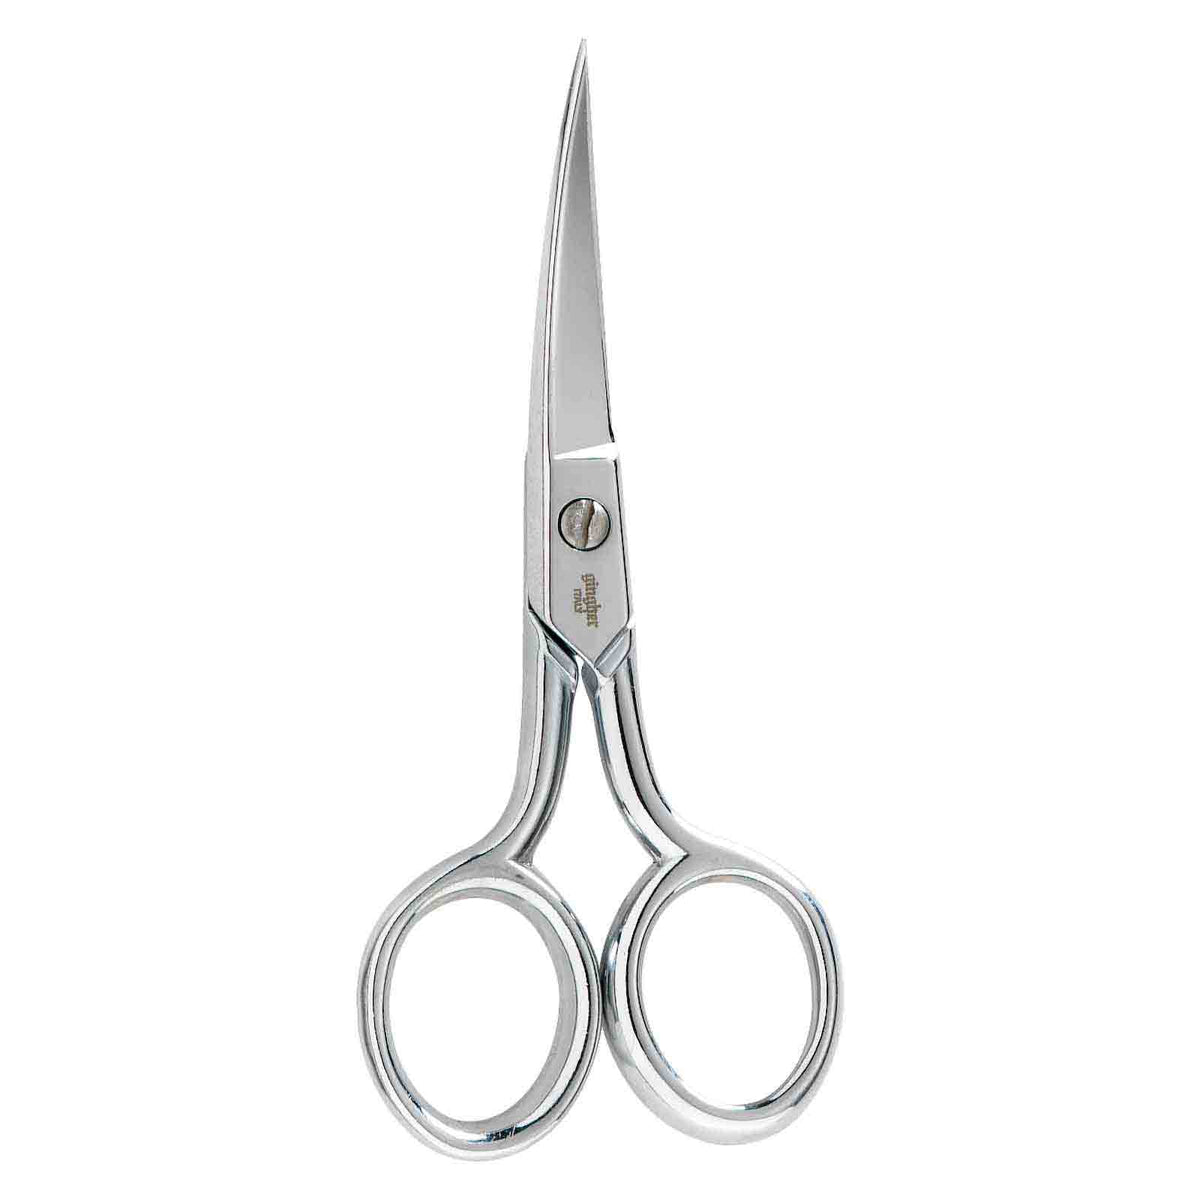 Buy Sewing Accessories Fiskars EMBROIDERY CURVED Scissors and